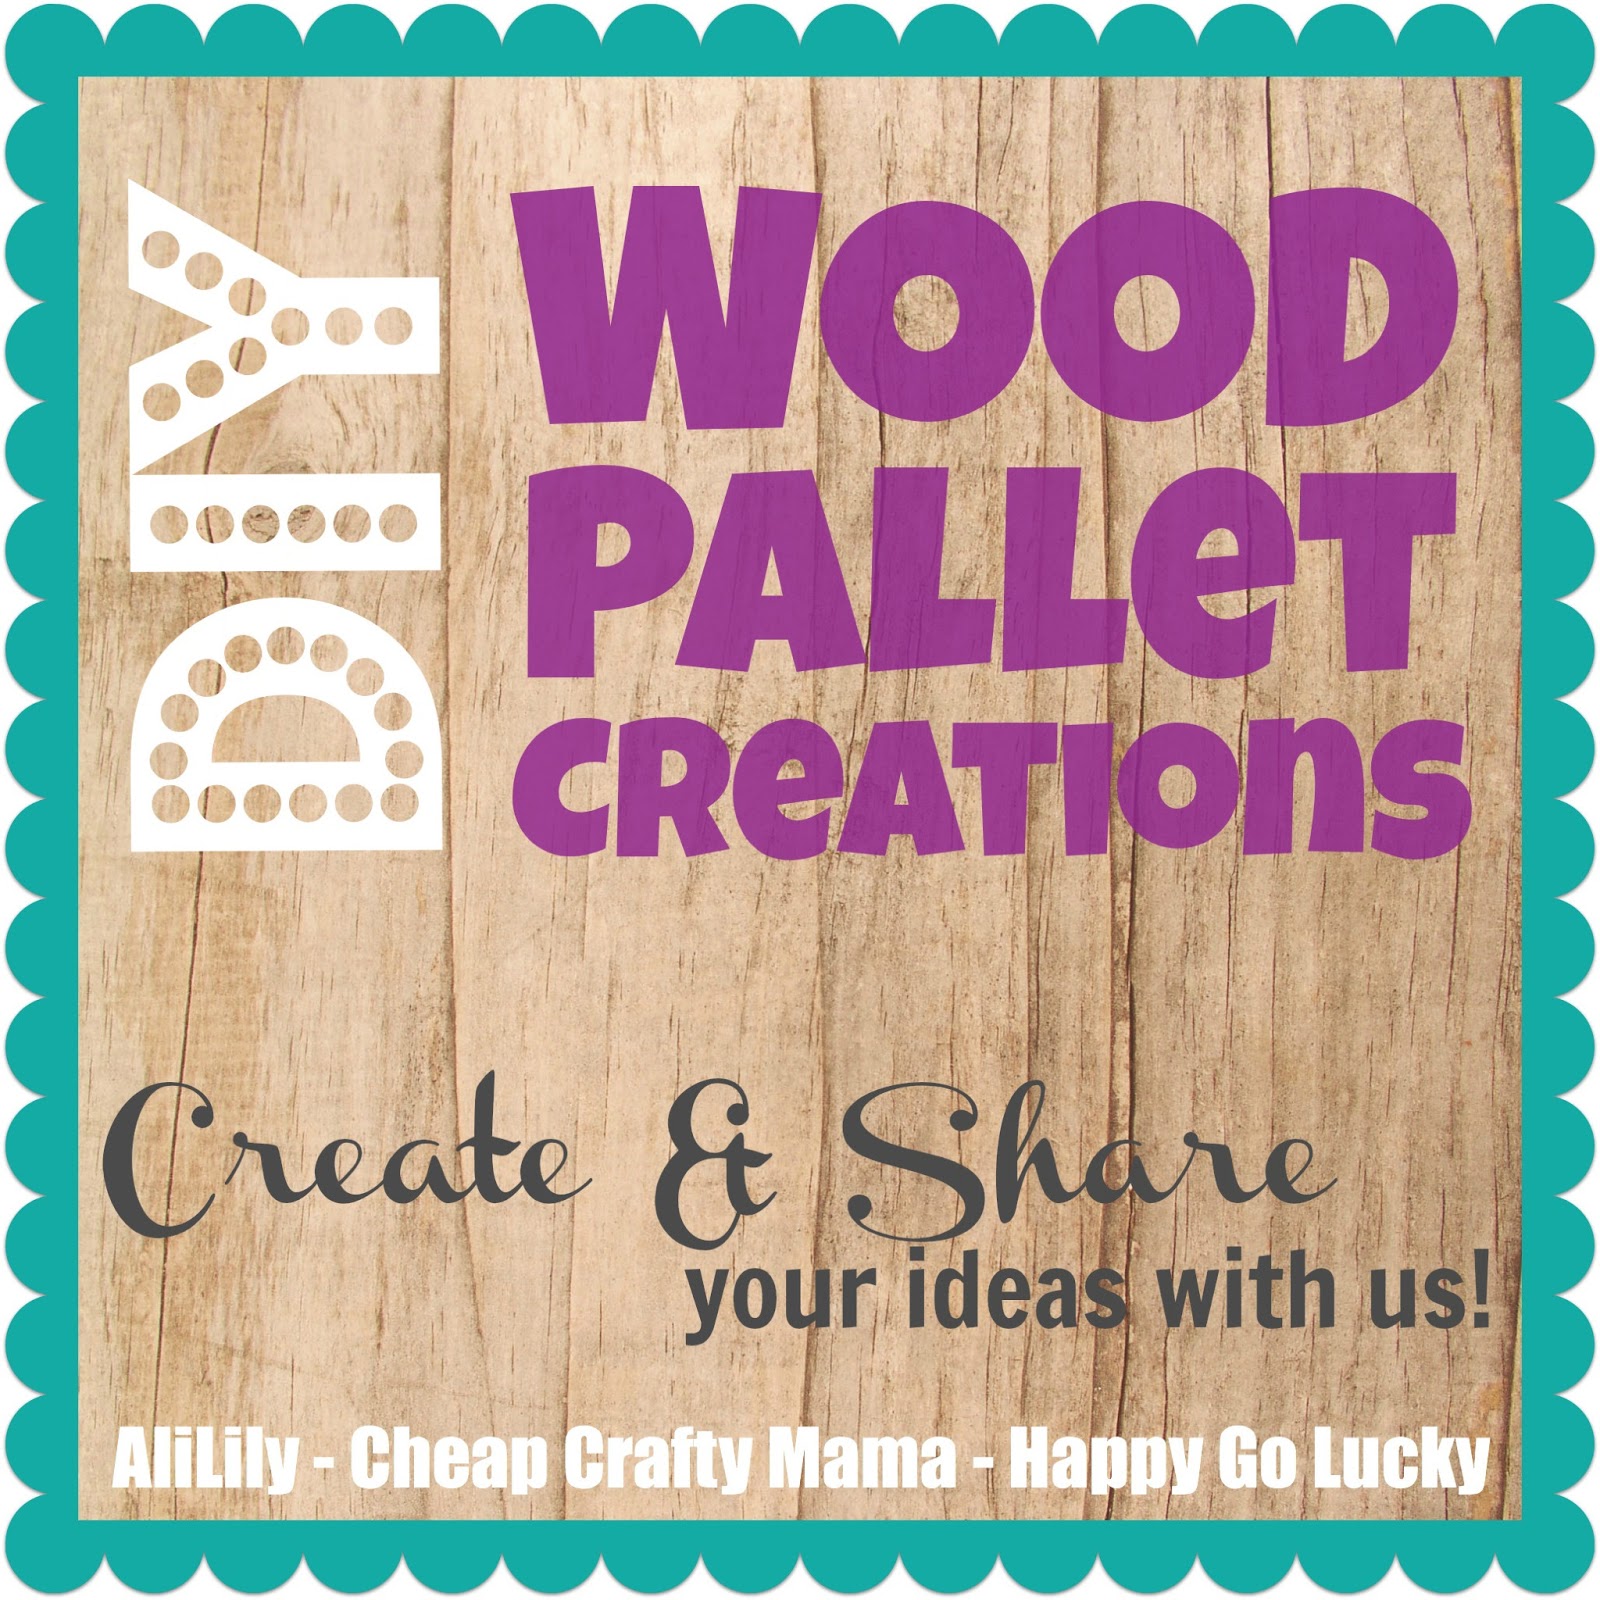 50 wood pallet projects